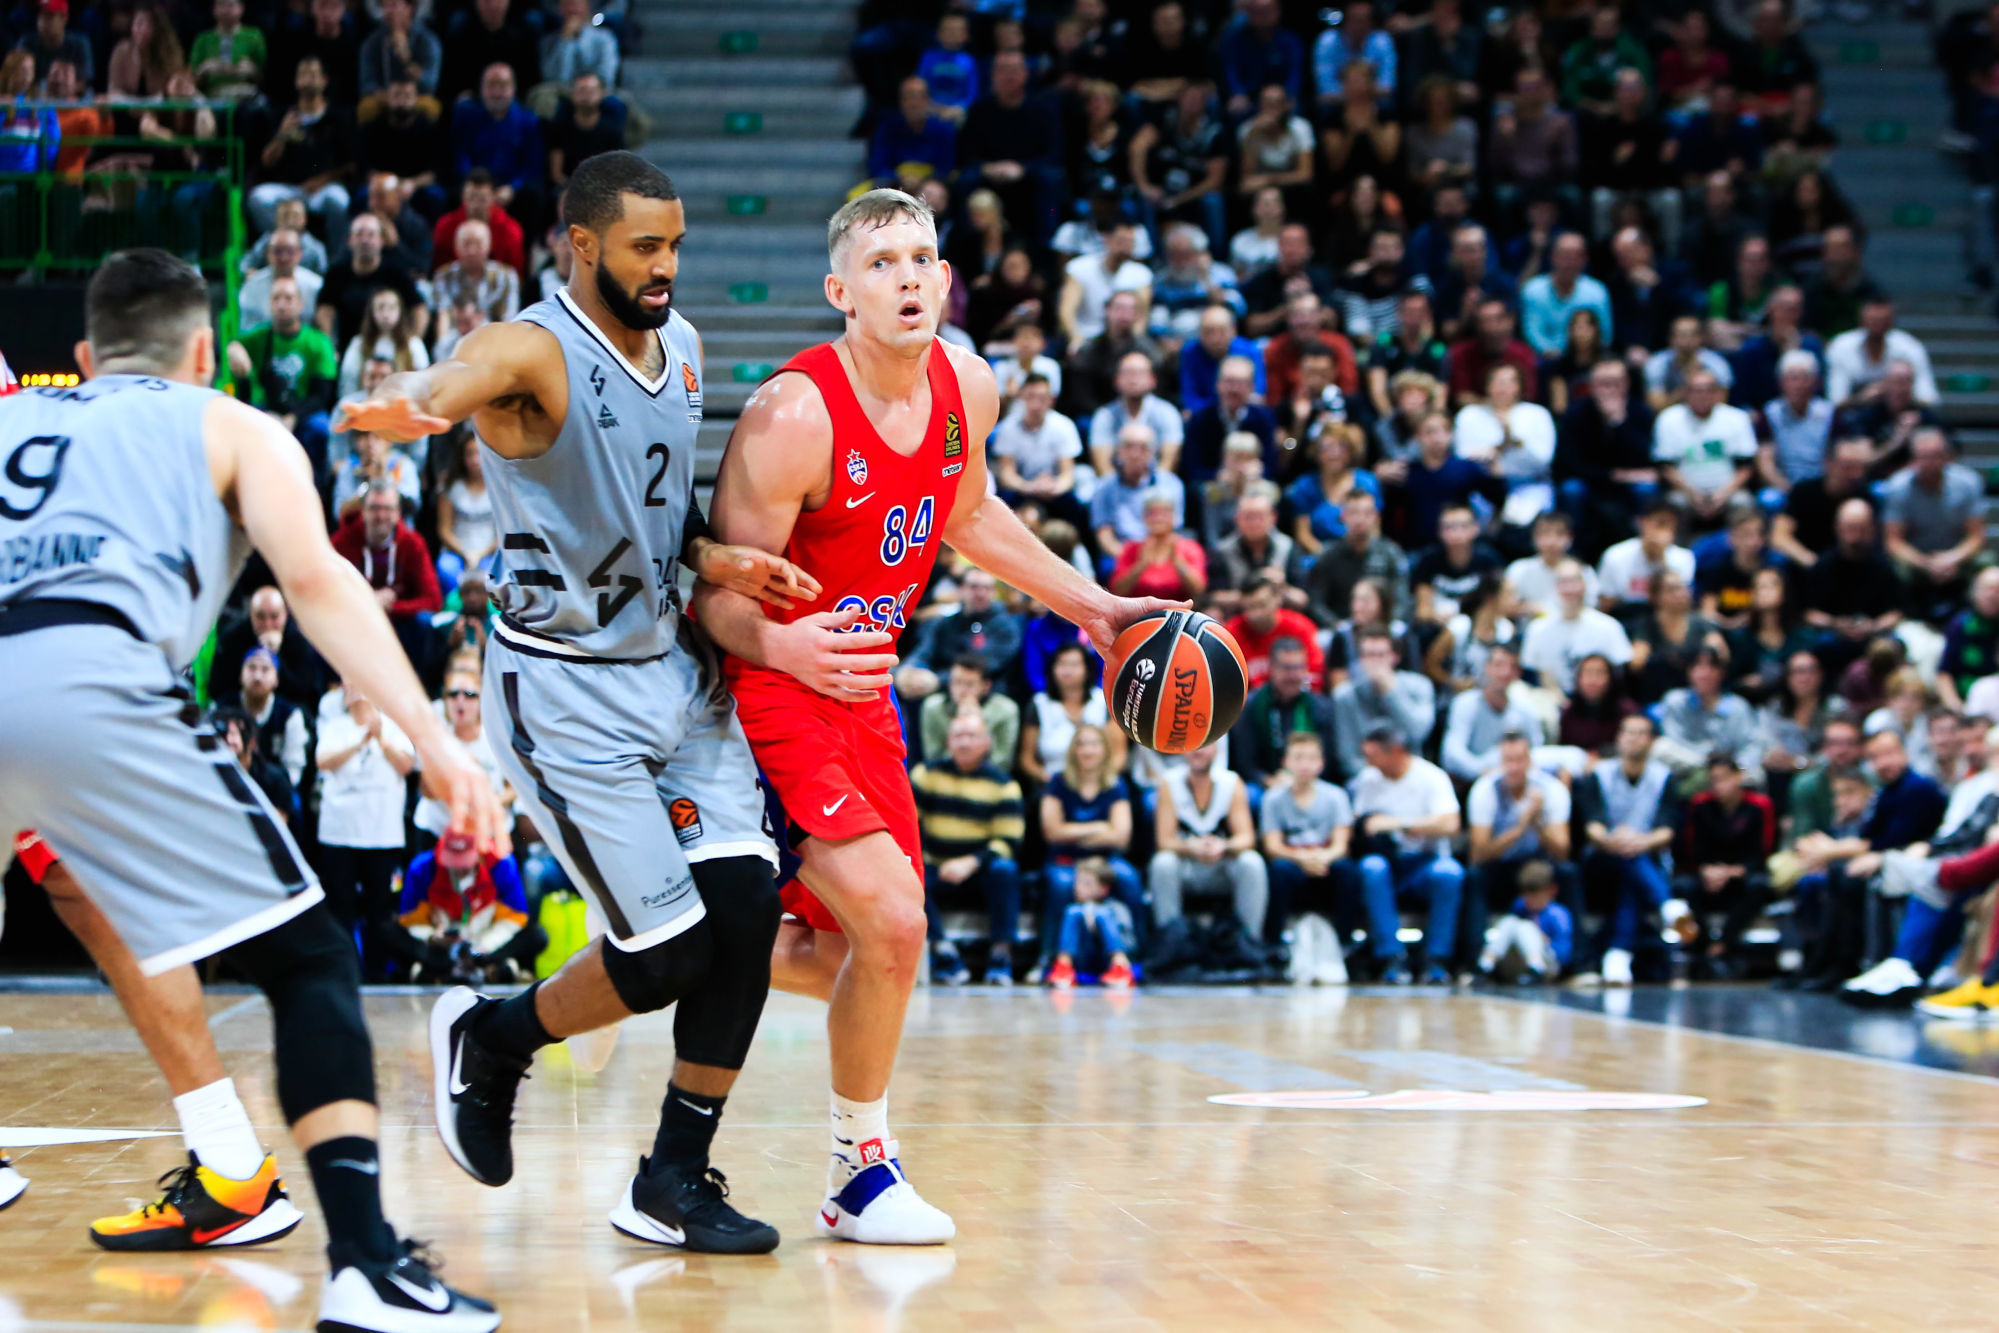 Ron BAKER of Moscow and Jordan TAYLOR of Lyon during the Euroleague match between ASVEL and Moscow at The Astroballe on November 8, 2019 in Villeurbanne, France. (Photo by Romain Biard/Icon Sport) - Astroballe - Villeurbanne (France)